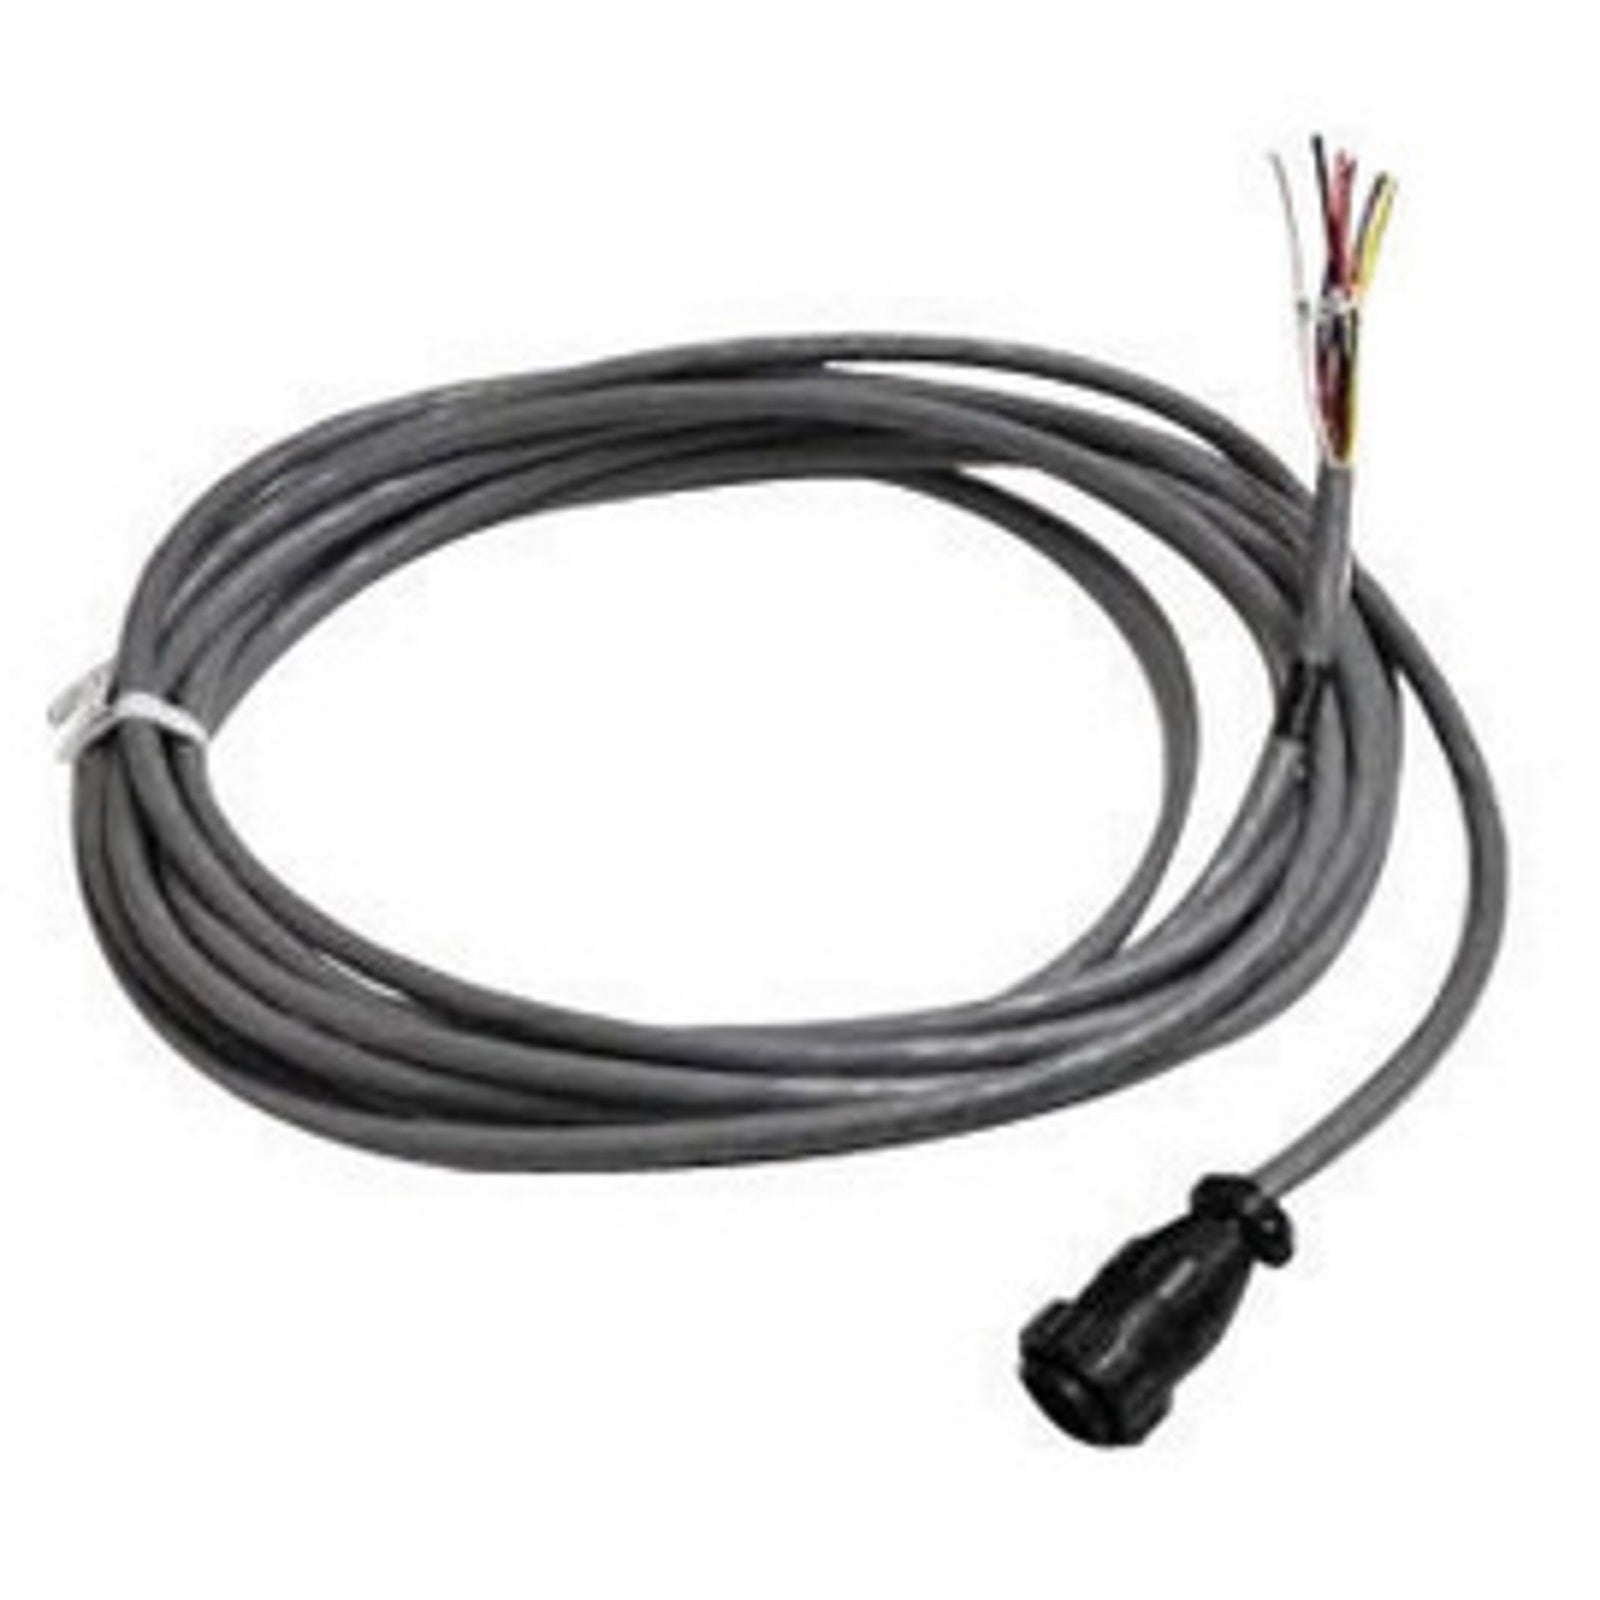 Thermal Dynamics 35' CNC Cable Assembly (9-1010)